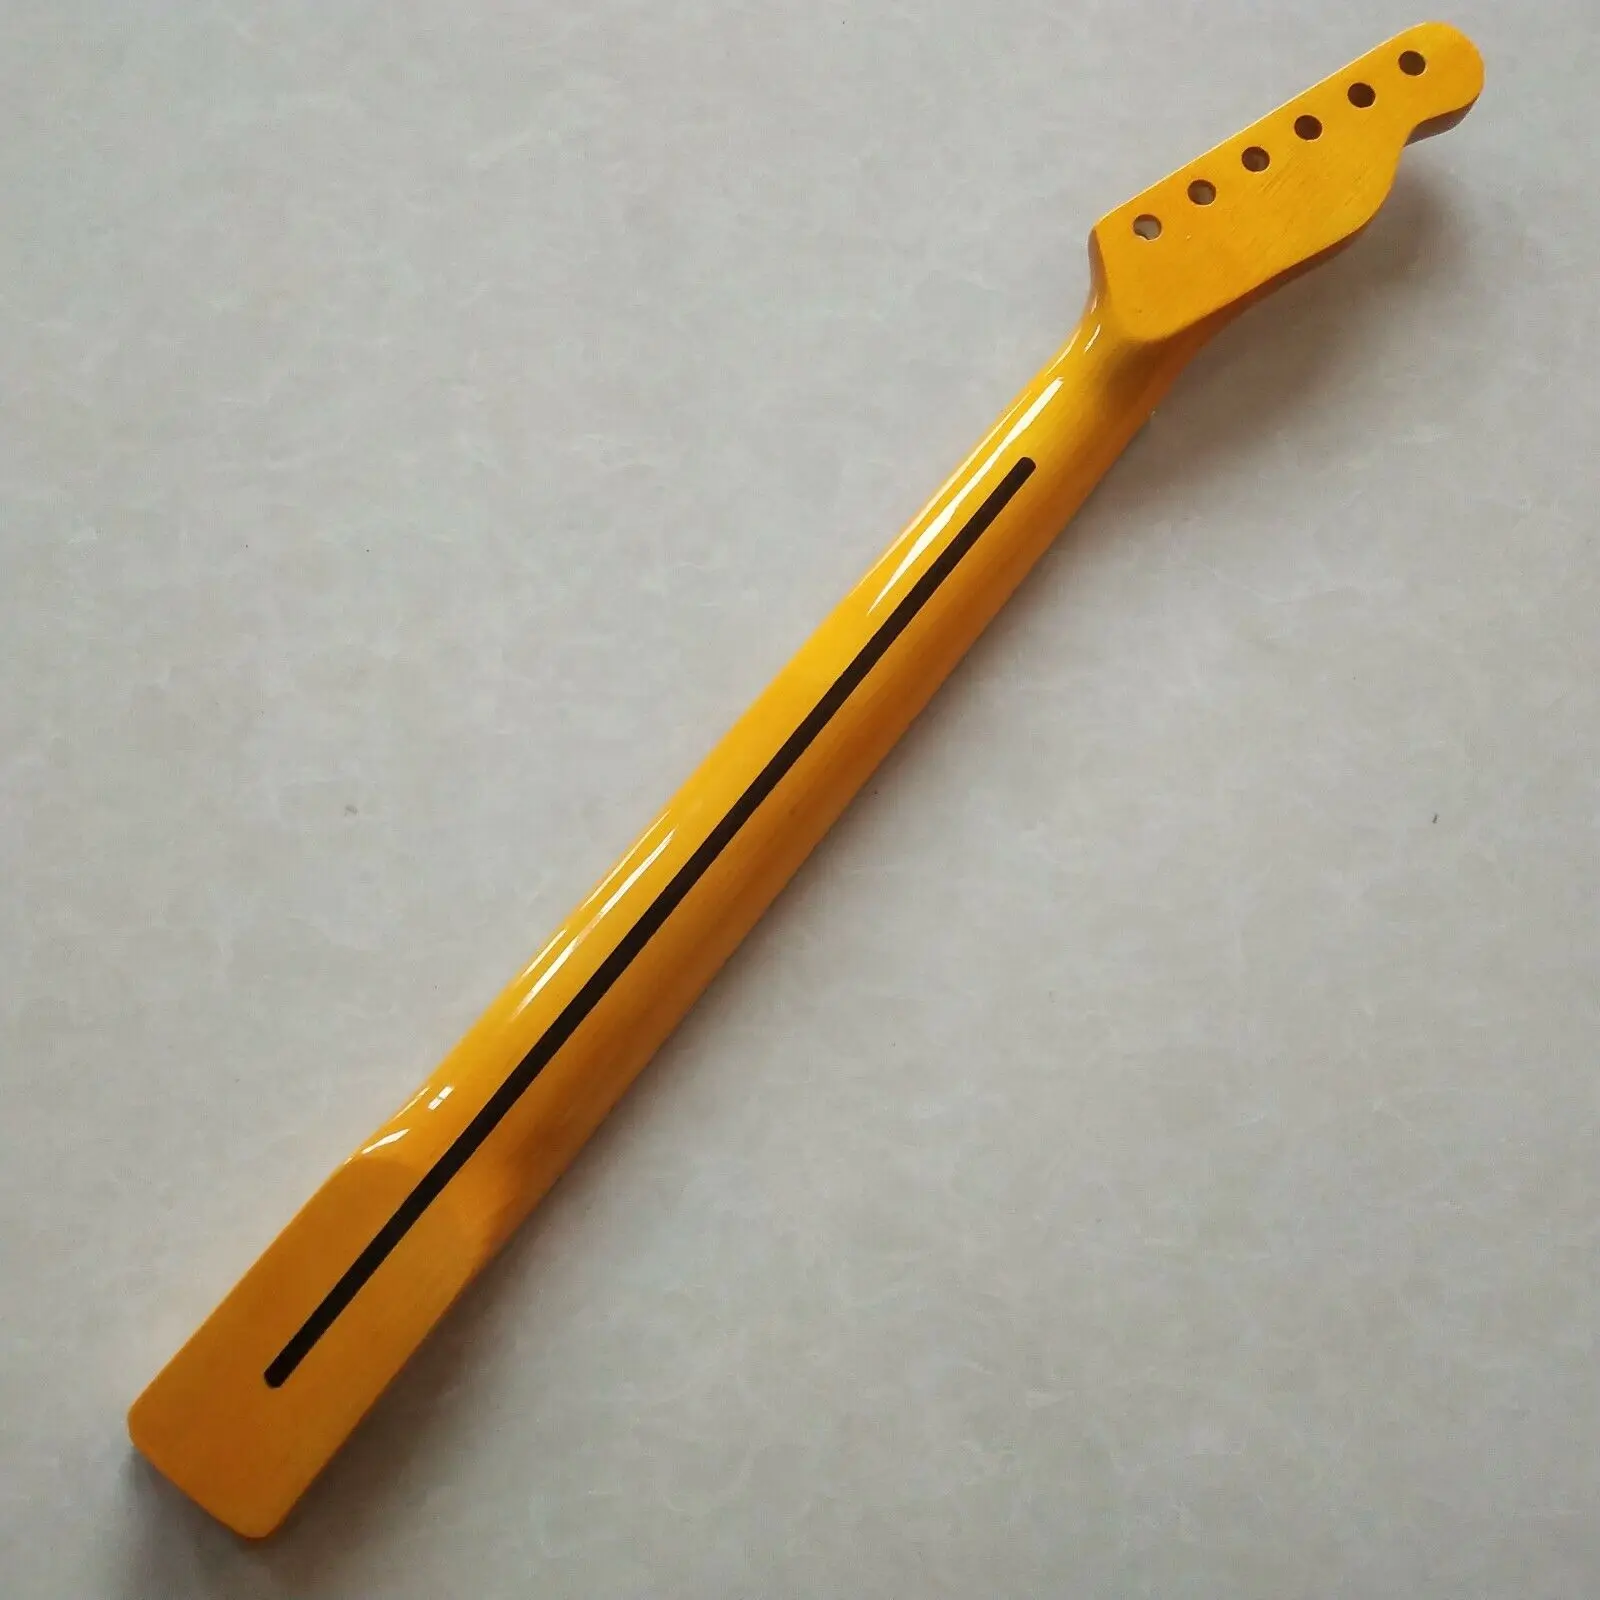 Yellow Reverse head 22 Frets Electric Guitar Neck 25.5inch Maple Fretboard Inlay enlarge